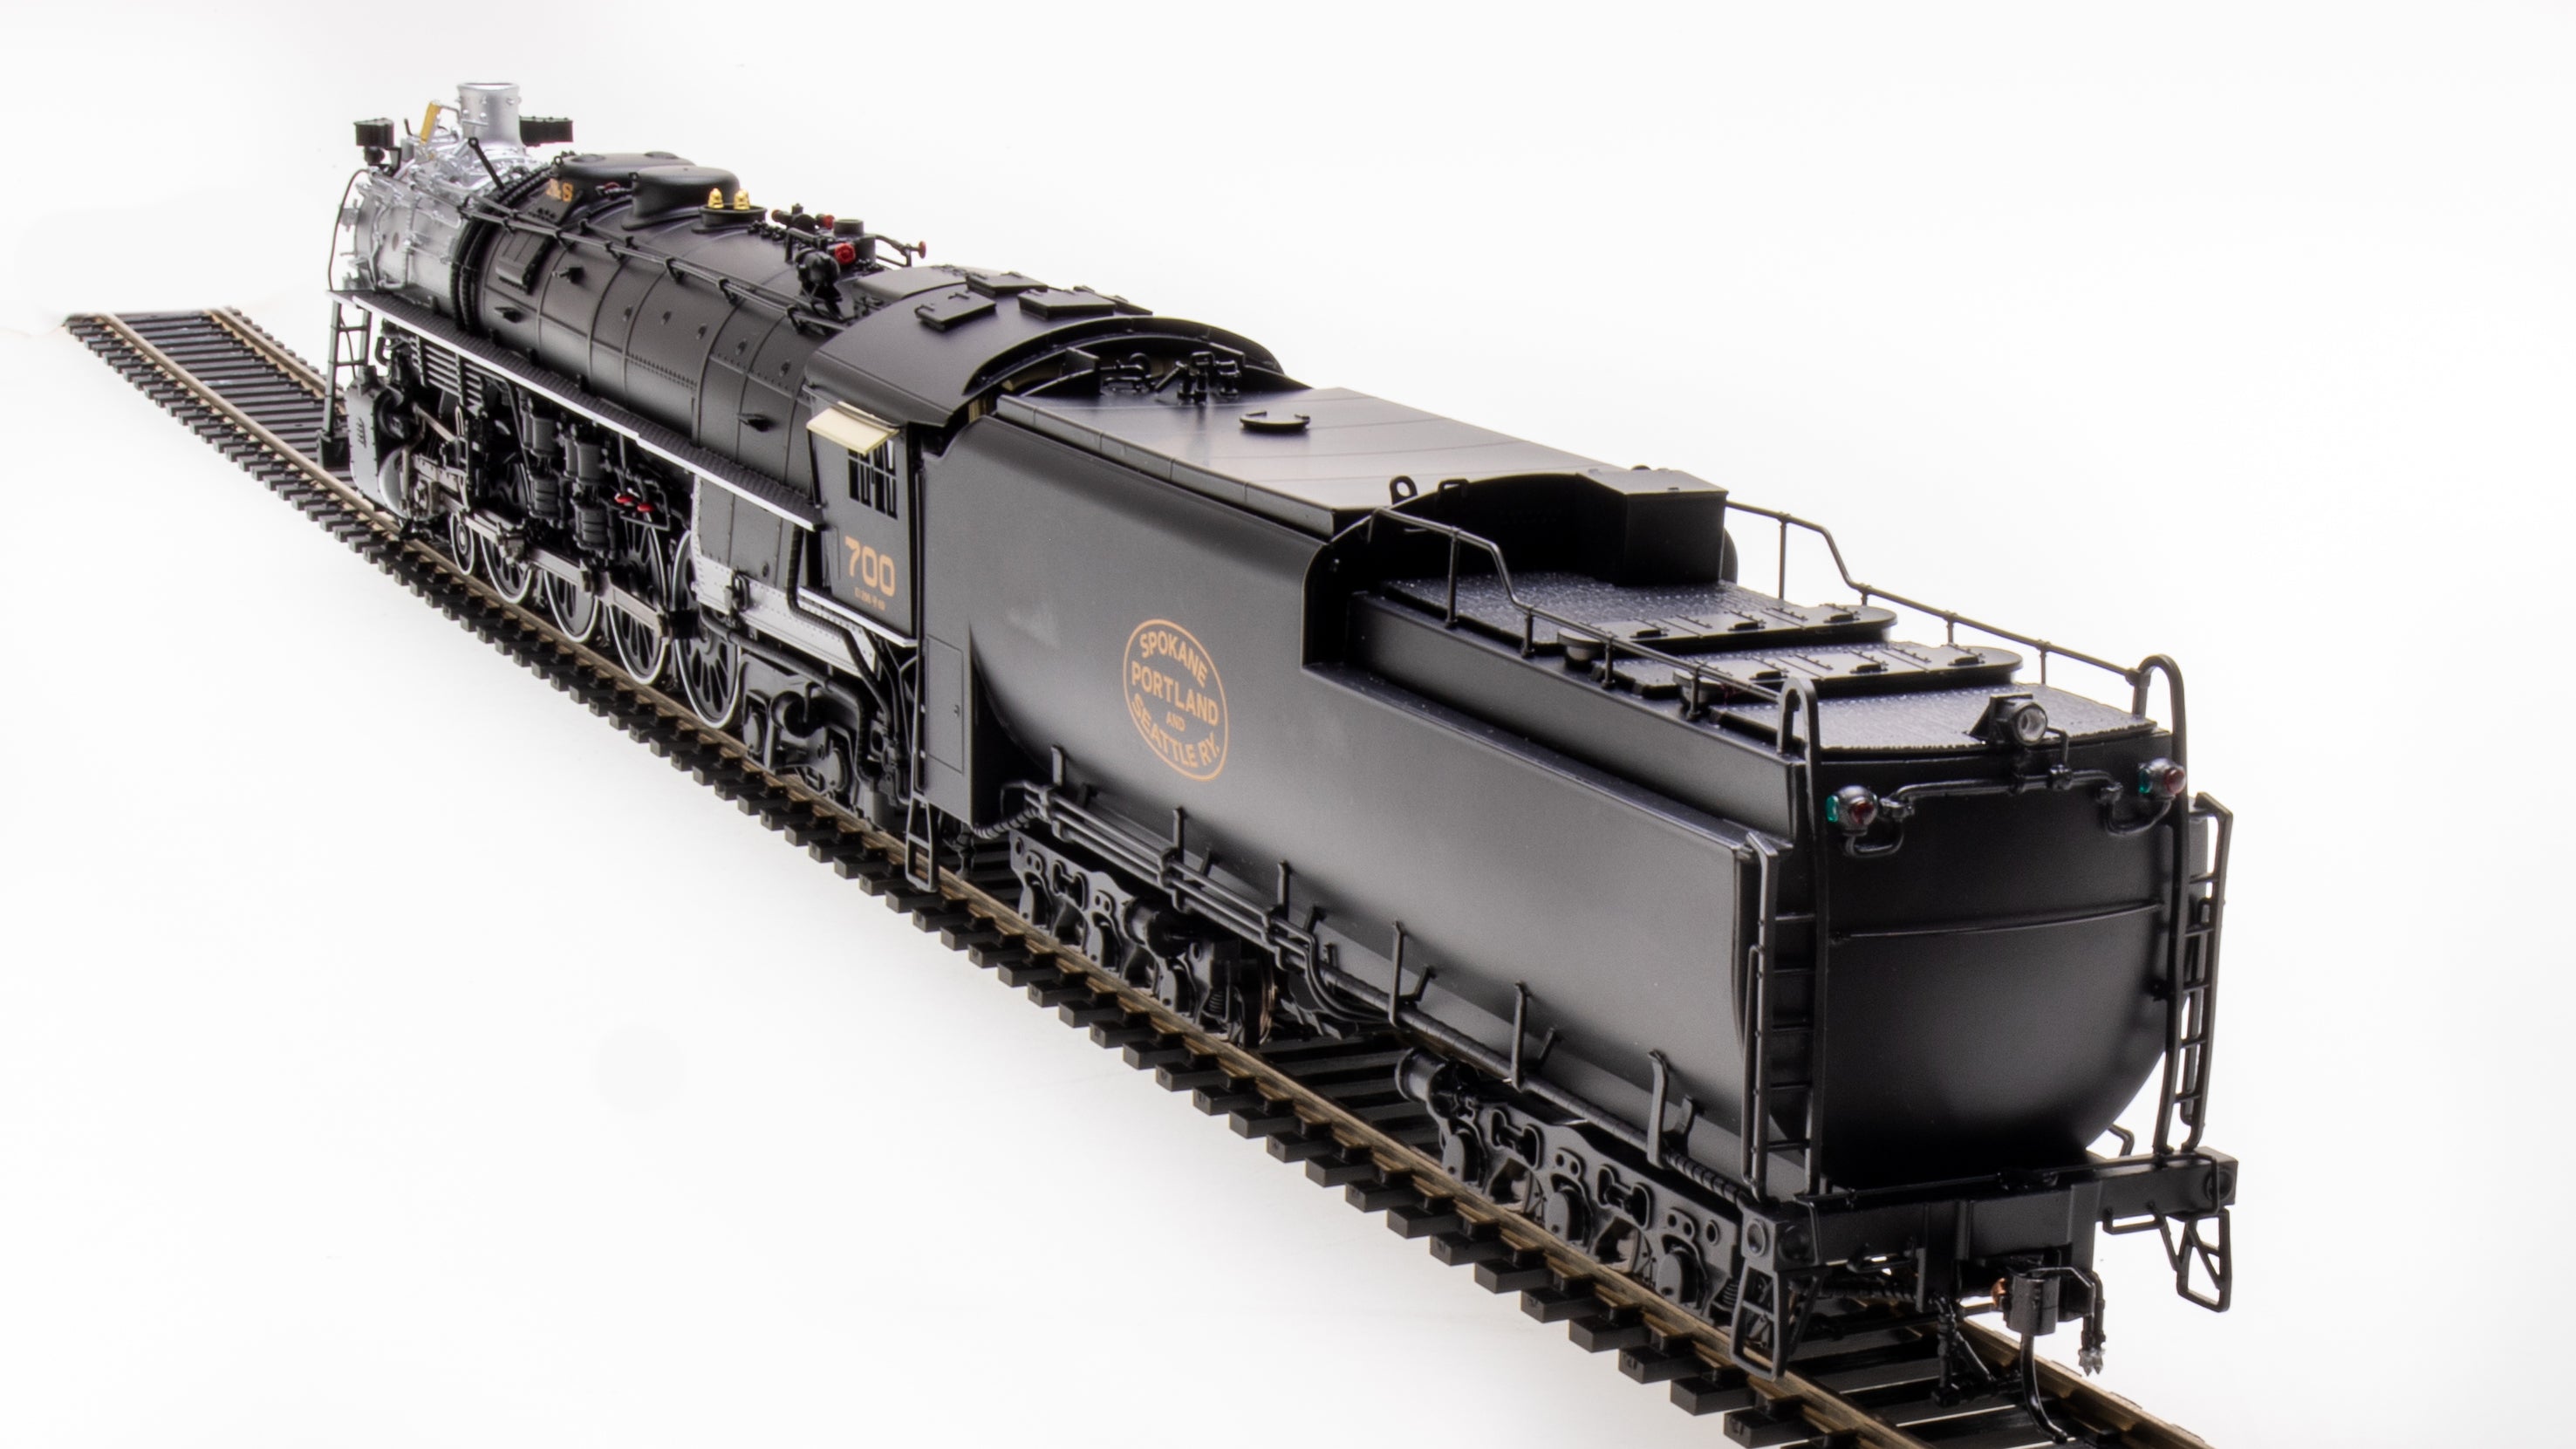 6966 SP&S E-1 4-8-4, #700, Excursion Version (1990-2004,) w/ High Numberboards, Paragon4 Sound/DC/DCC, Smoke, HO